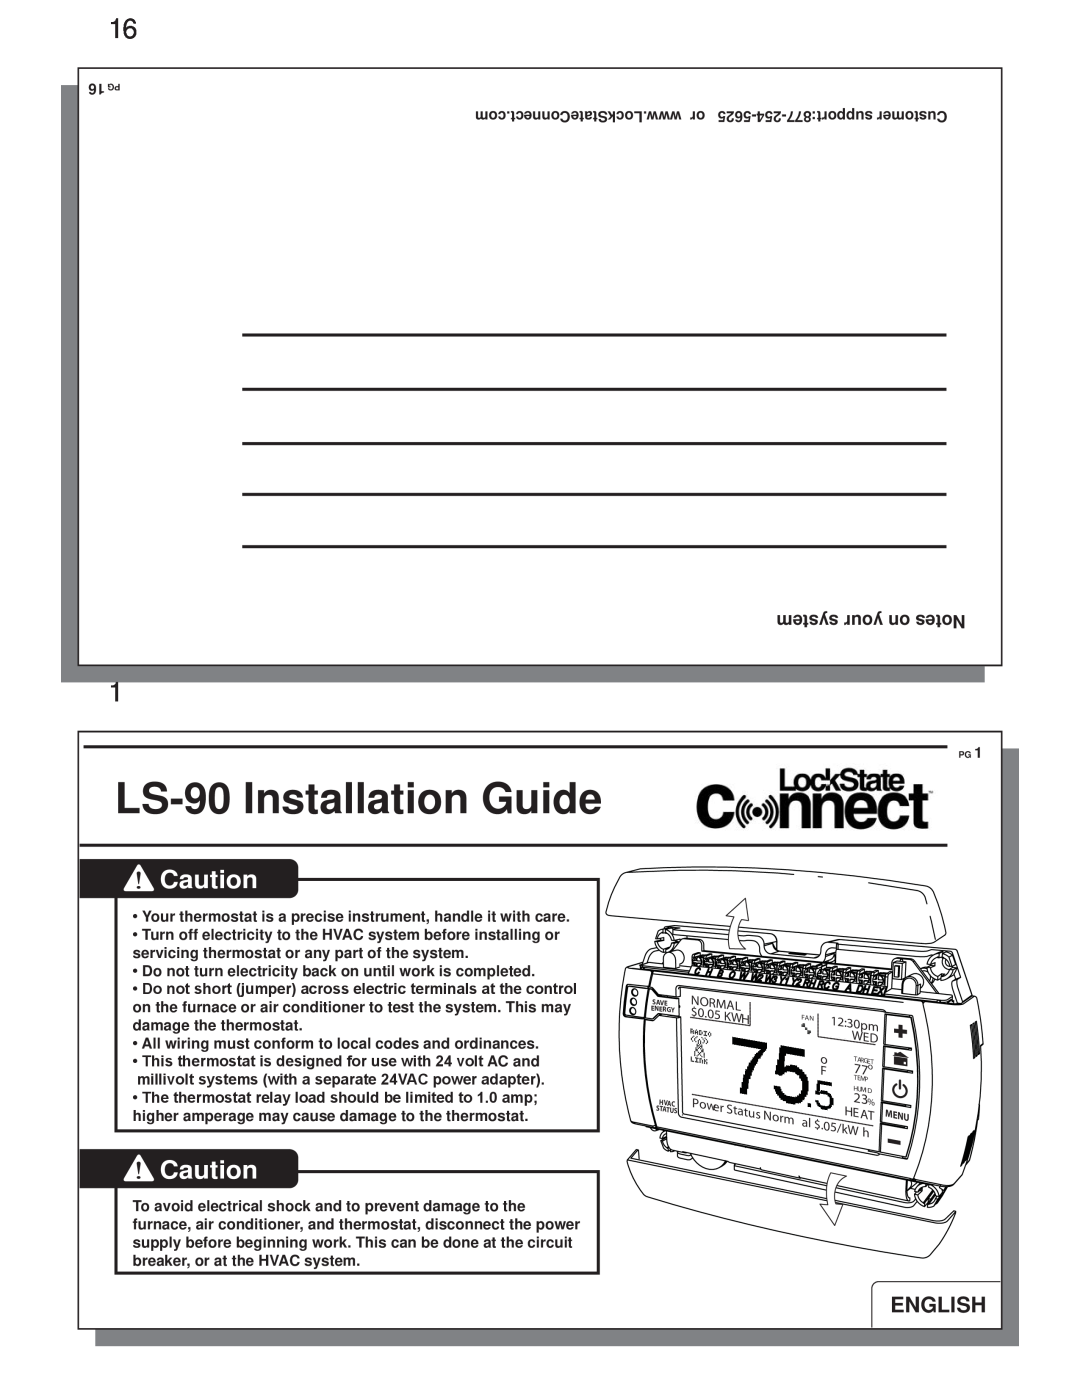 Trane manual English, system your on Notes, LS-90 Installation Guide 